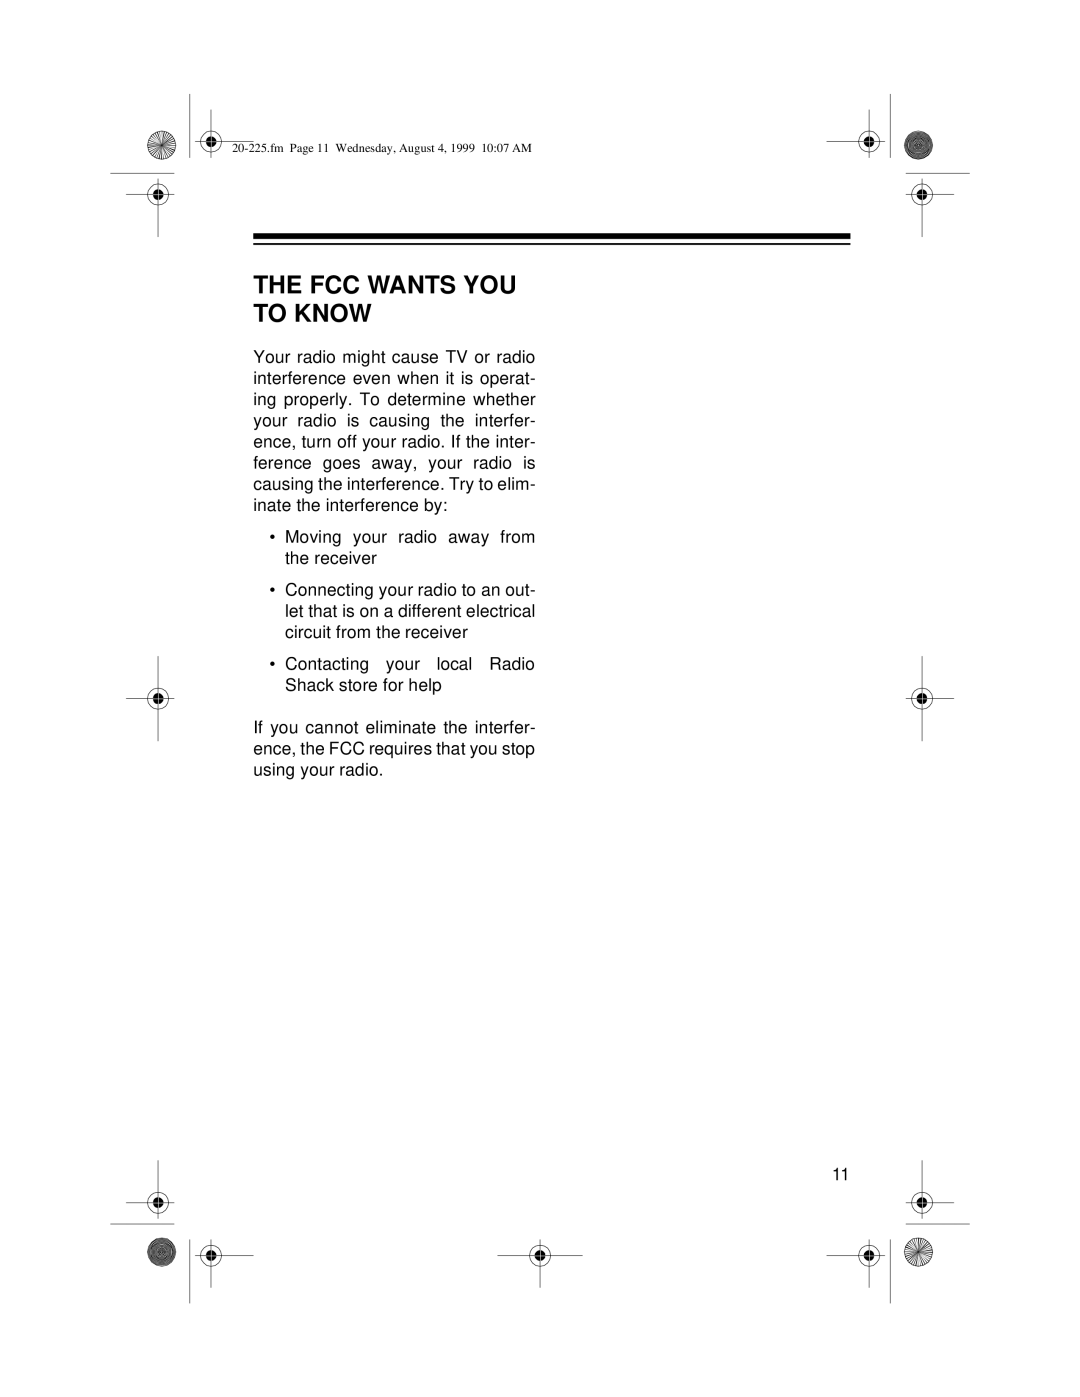 Radio Shack DX-395 owner manual The Fcc Wants You To Know 